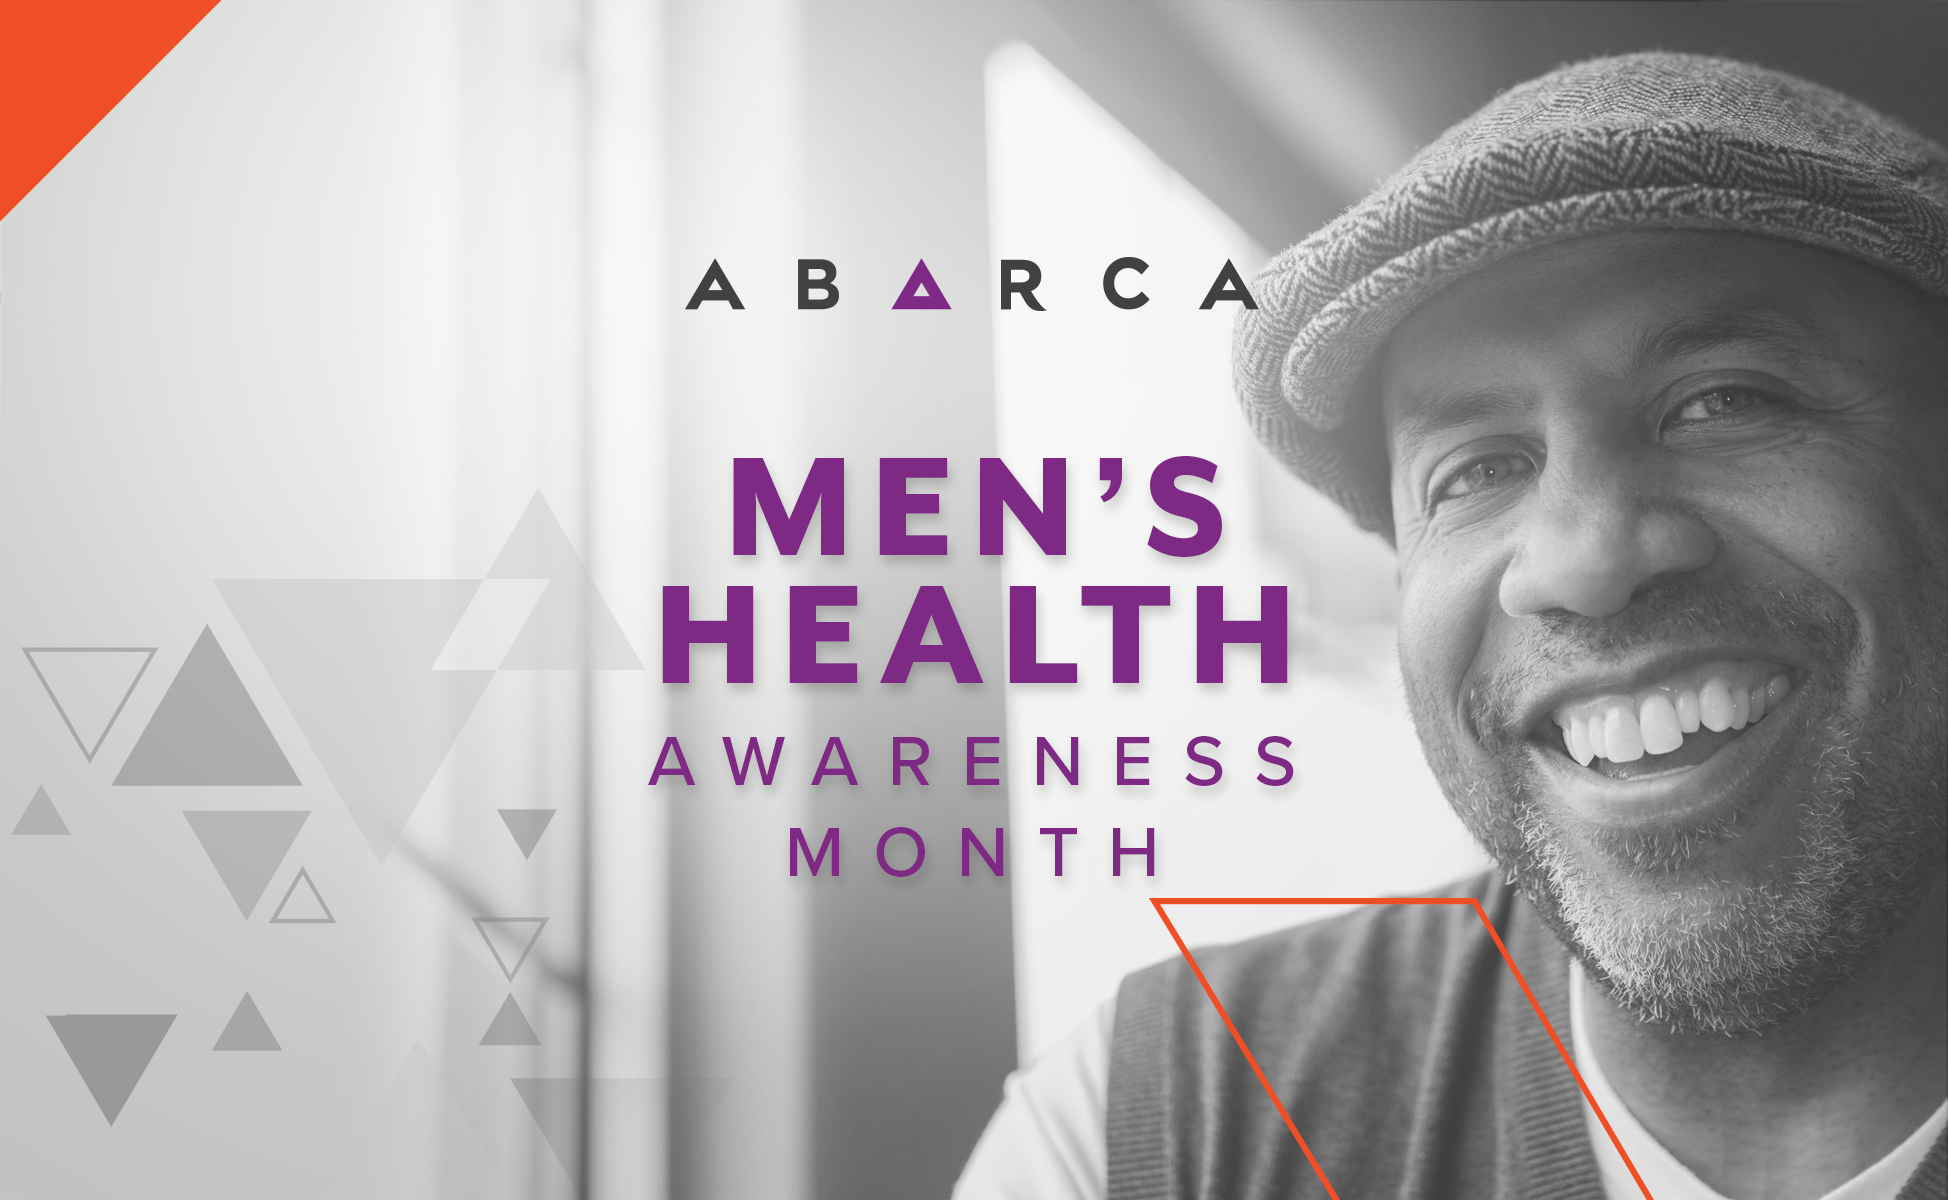 Abarca takes action this Movember by bringing awareness to Prostate and Testicular Cancers